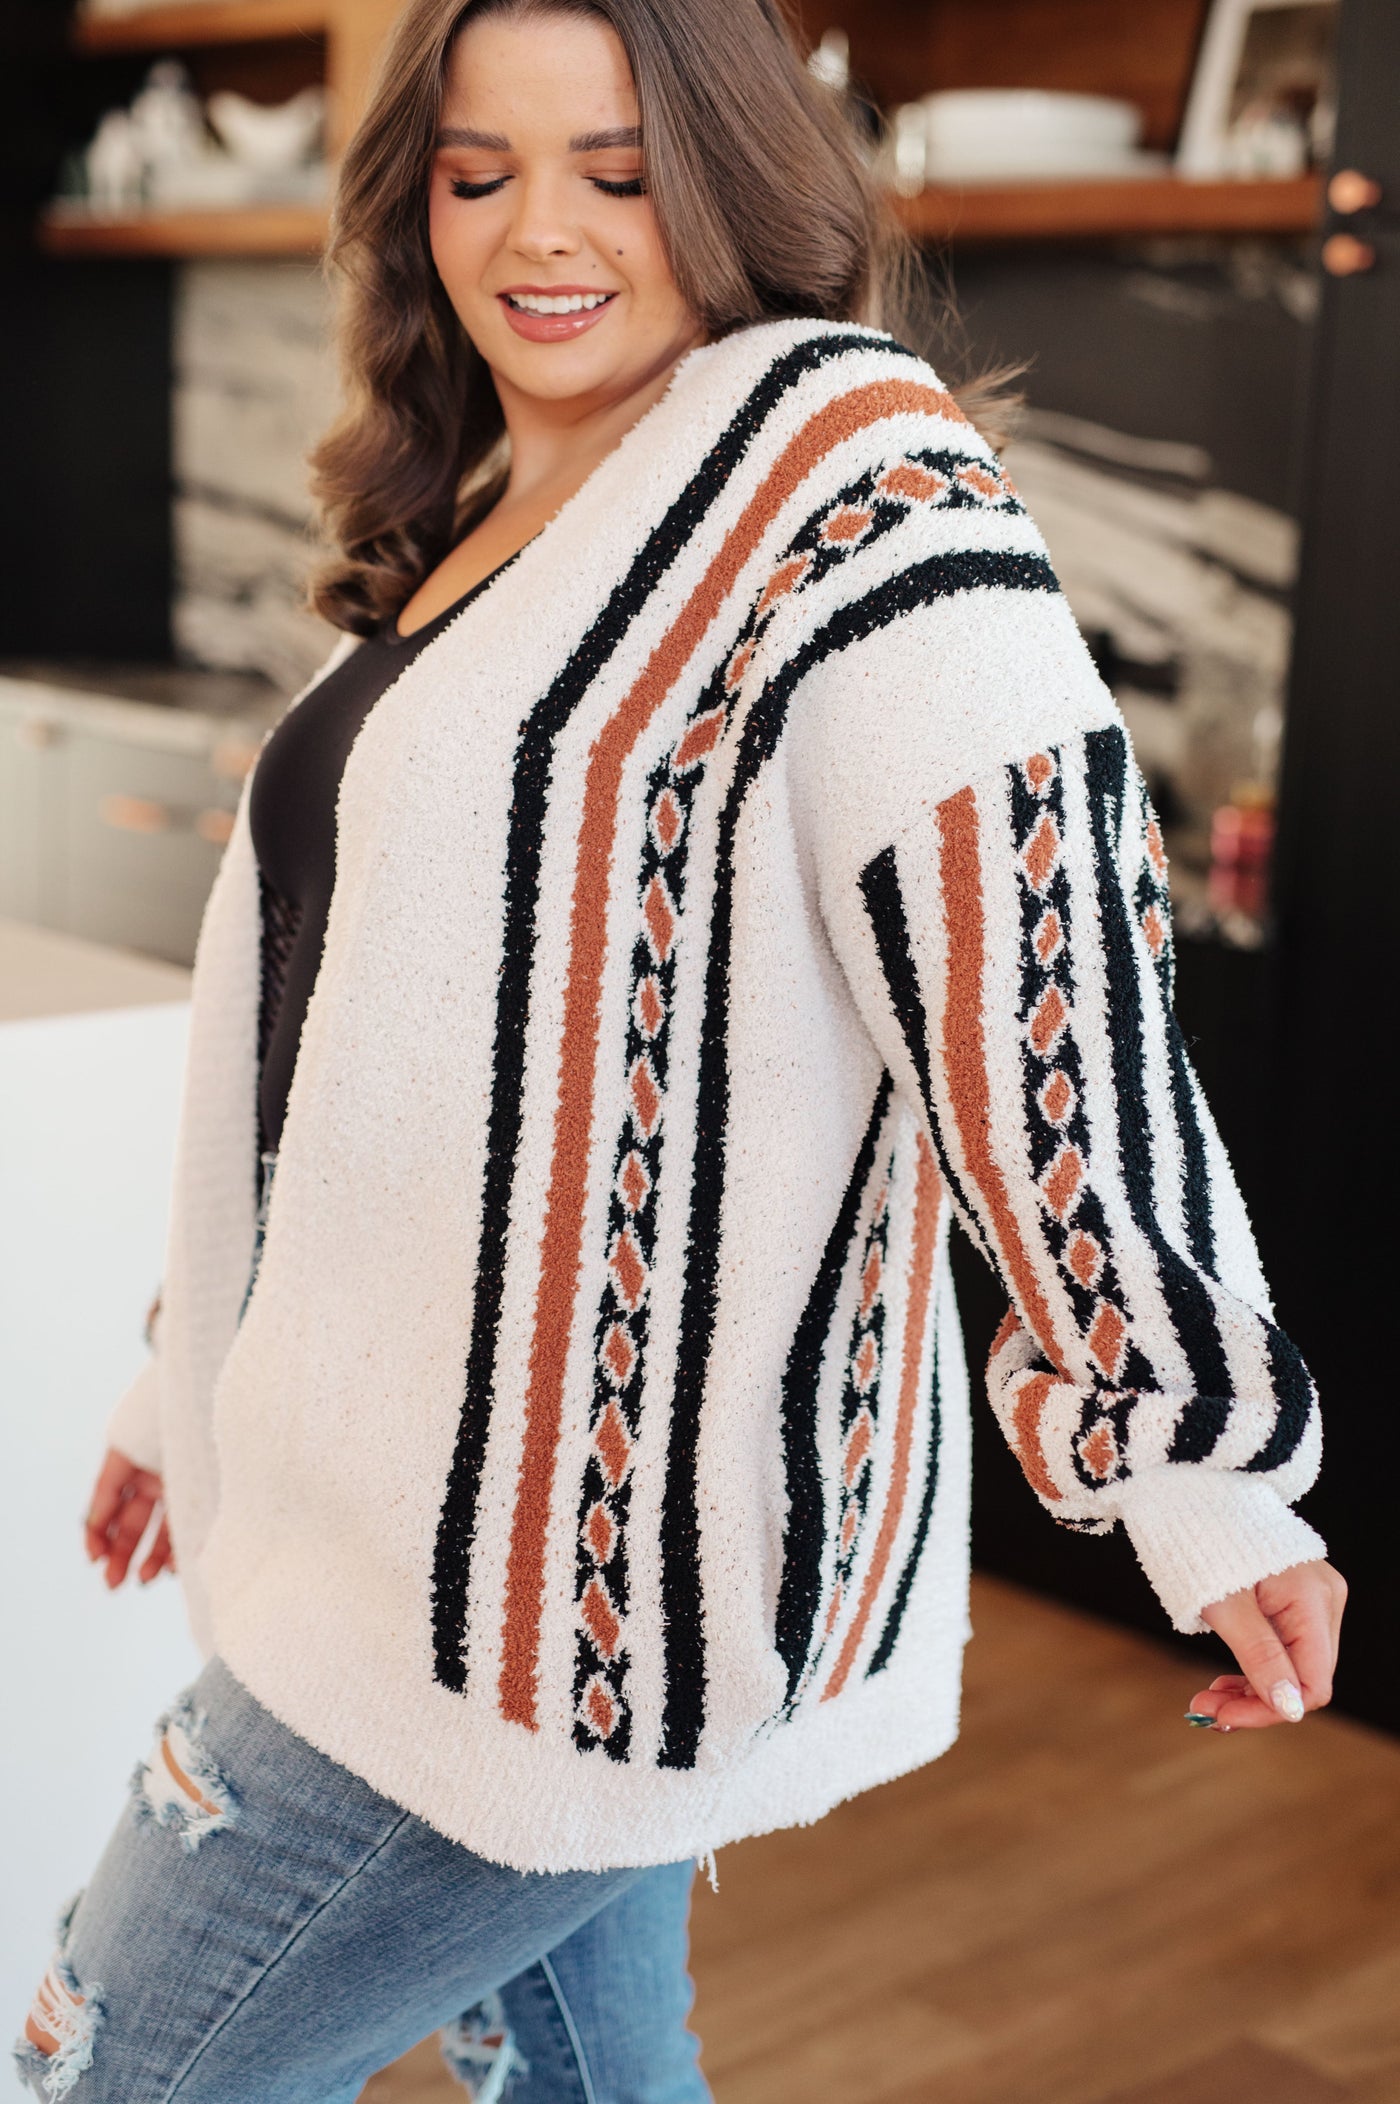 This cardigan is sure to become your new go-to. The Holding On Aztec Print Cardigan features a super soft sweater knit that provides warmth and comfort